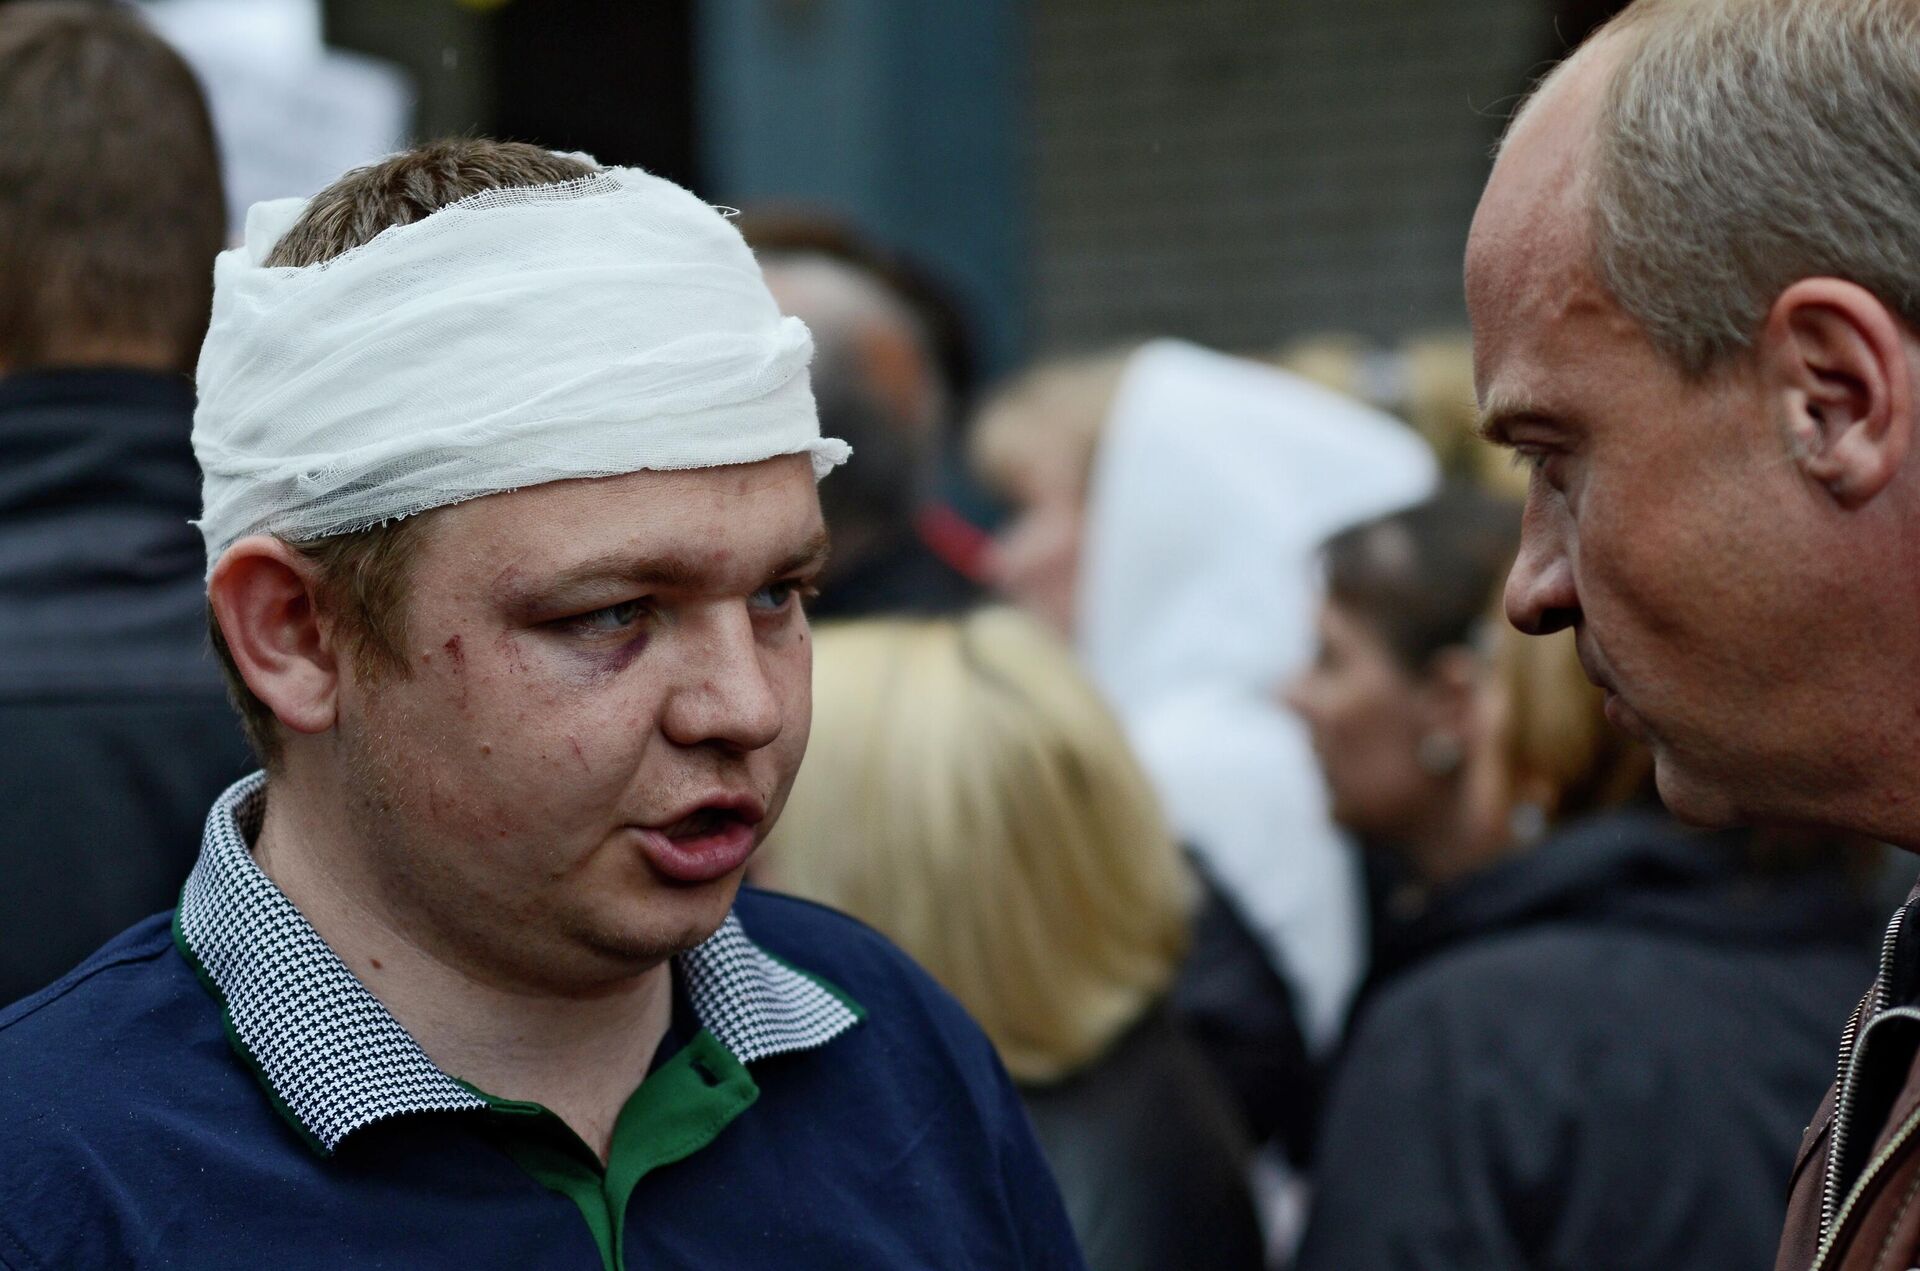 The leader of the Odessa Struggle Association, Regional Councillor Alexey Albu, who was severely beaten during Friday's clashes in Kulikovo Pole Square in Odessa, presents among the protesters outside the city police headquarters on Preobrazhenskaya Street. They demand the release of all detained supporters of federalism. 4 May 2014. - Sputnik International, 1920, 21.05.2022